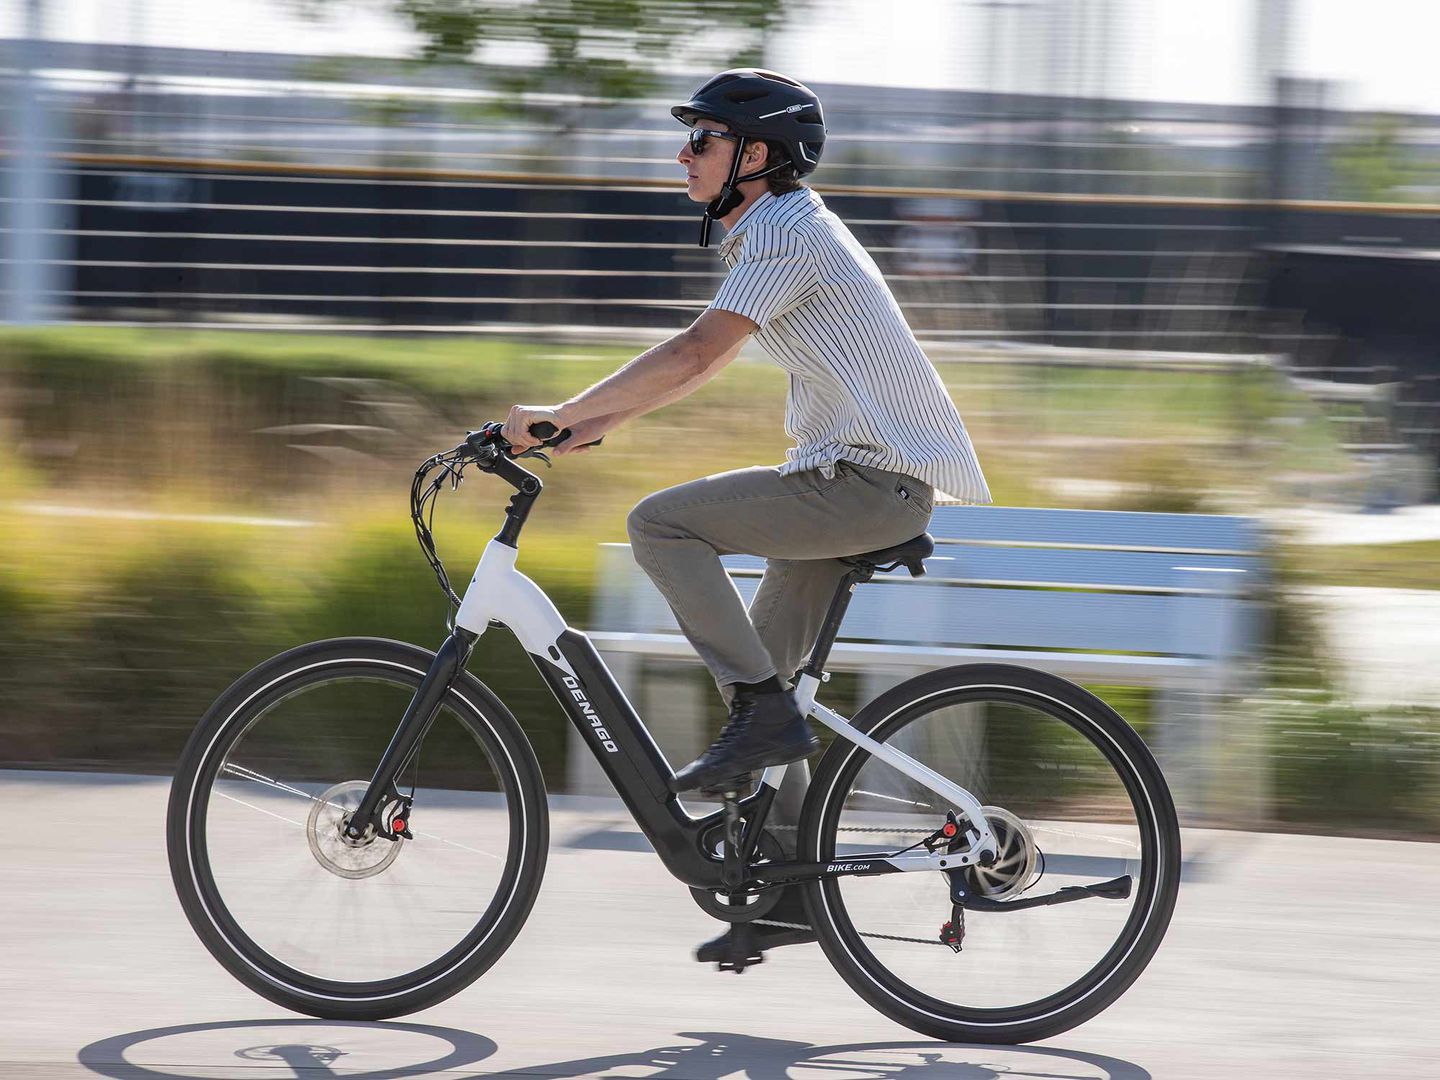 Cycle Volta: "Denago's City Model 1 punches well above its weight class"